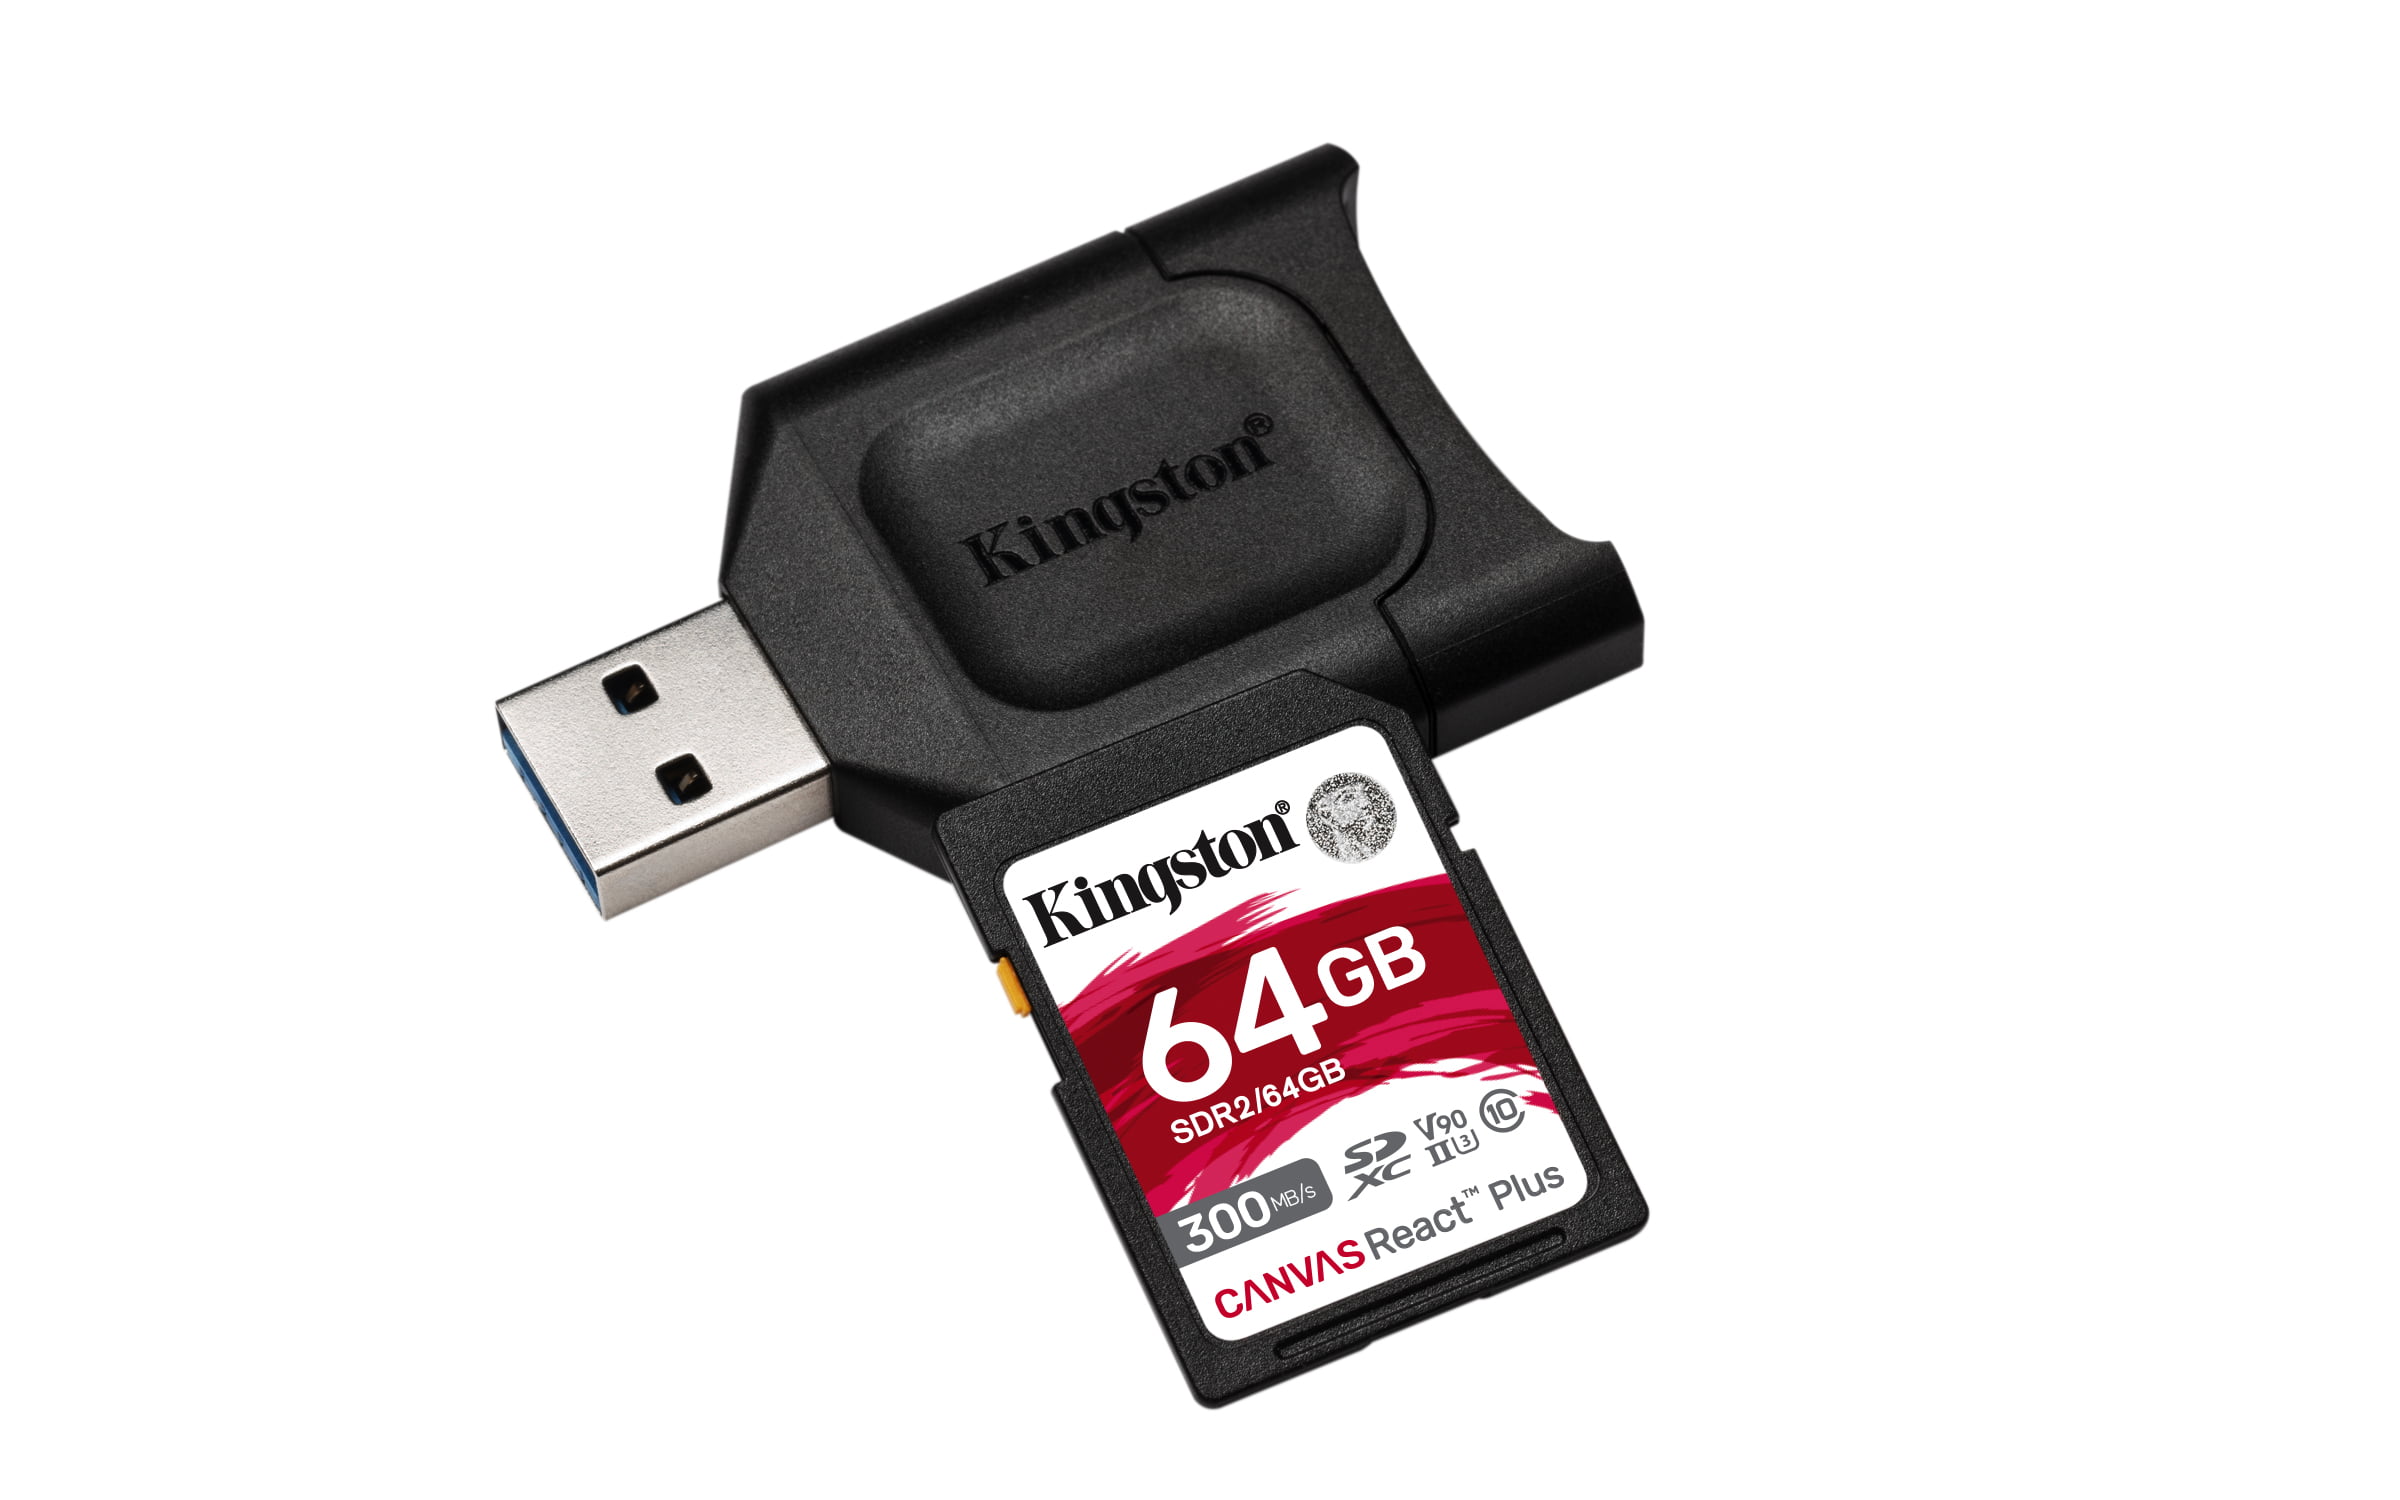 Kingston 128GB Gionee Ctrl V4S MicroSDXC Canvas Select Plus Card Verified by SanFlash. 100MBs Works with Kingston